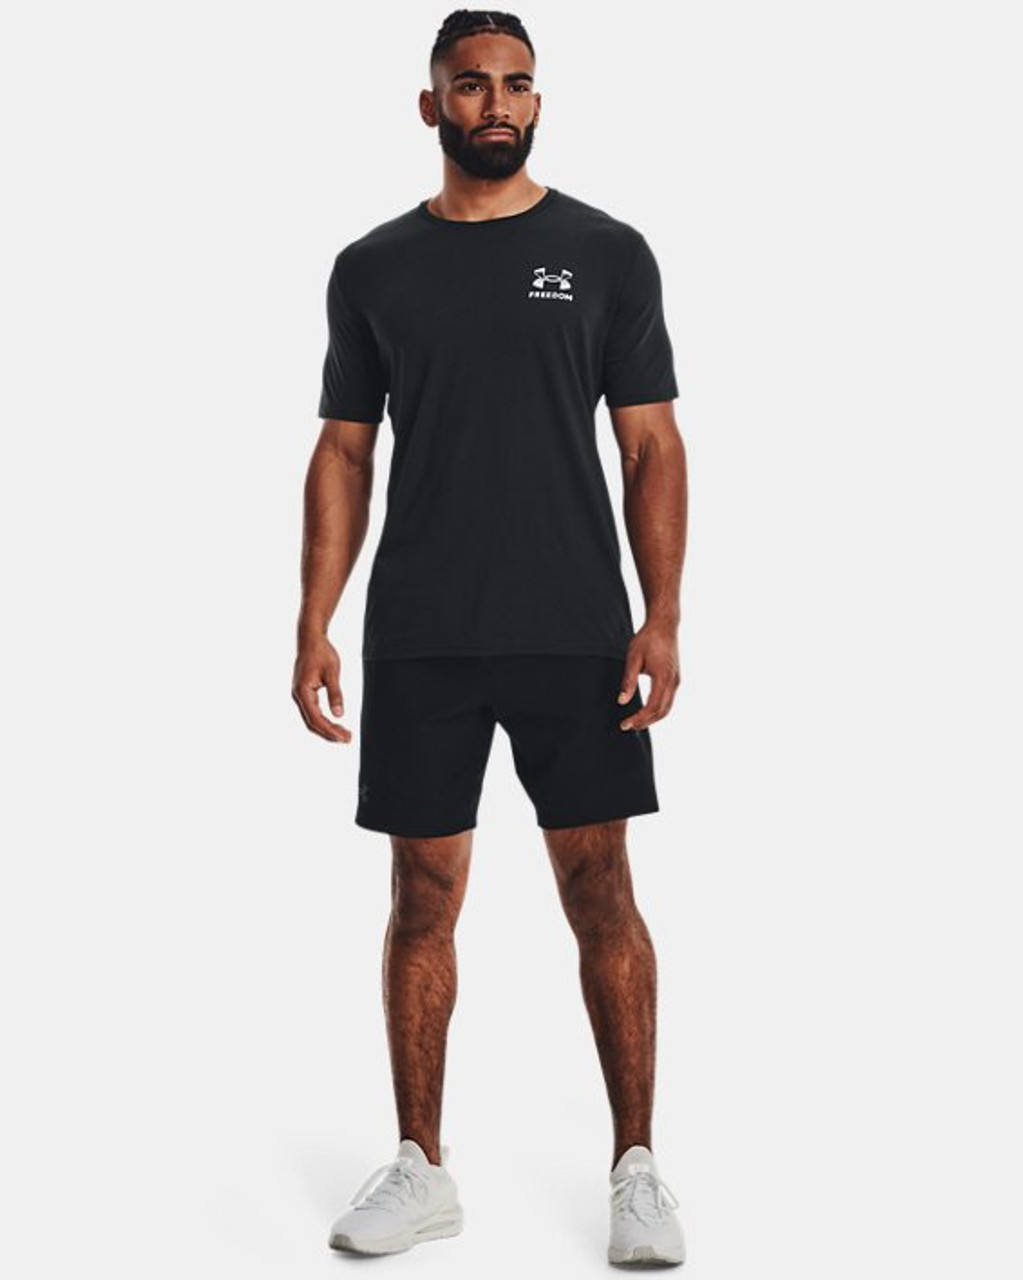 Mens Under Armour T Shirts For Sale